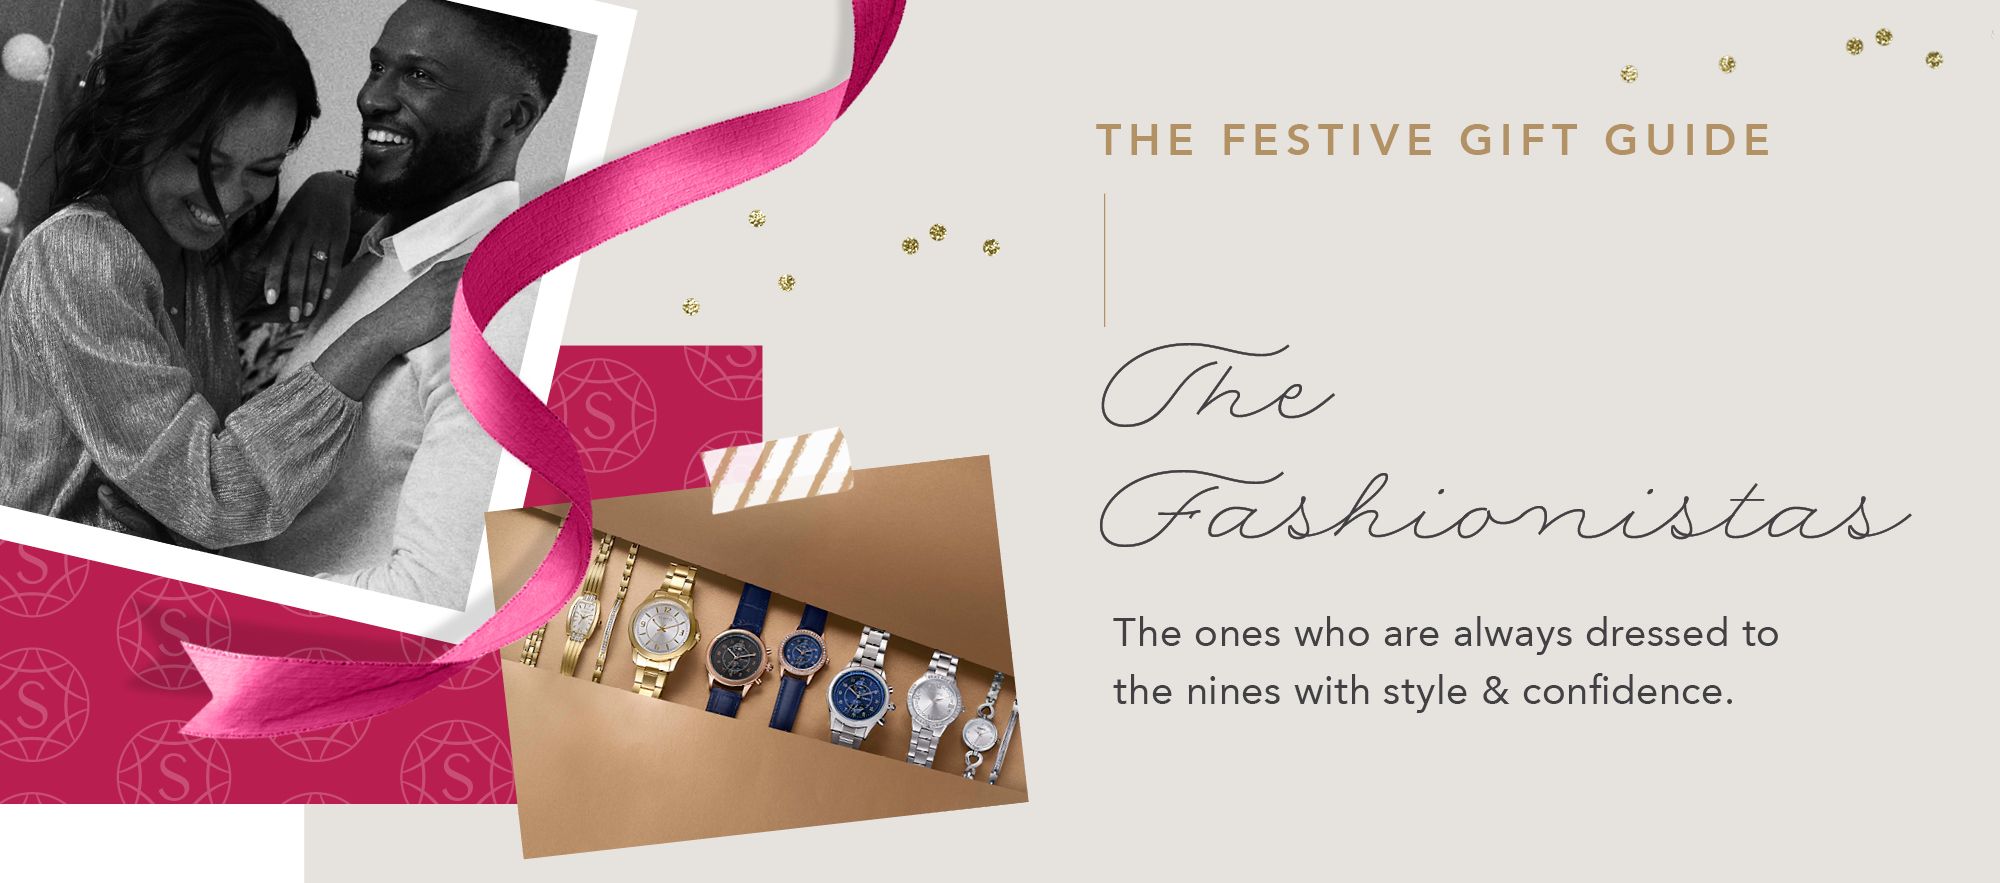 THE FESTIVE GIFT GUIDE The Fashionistas